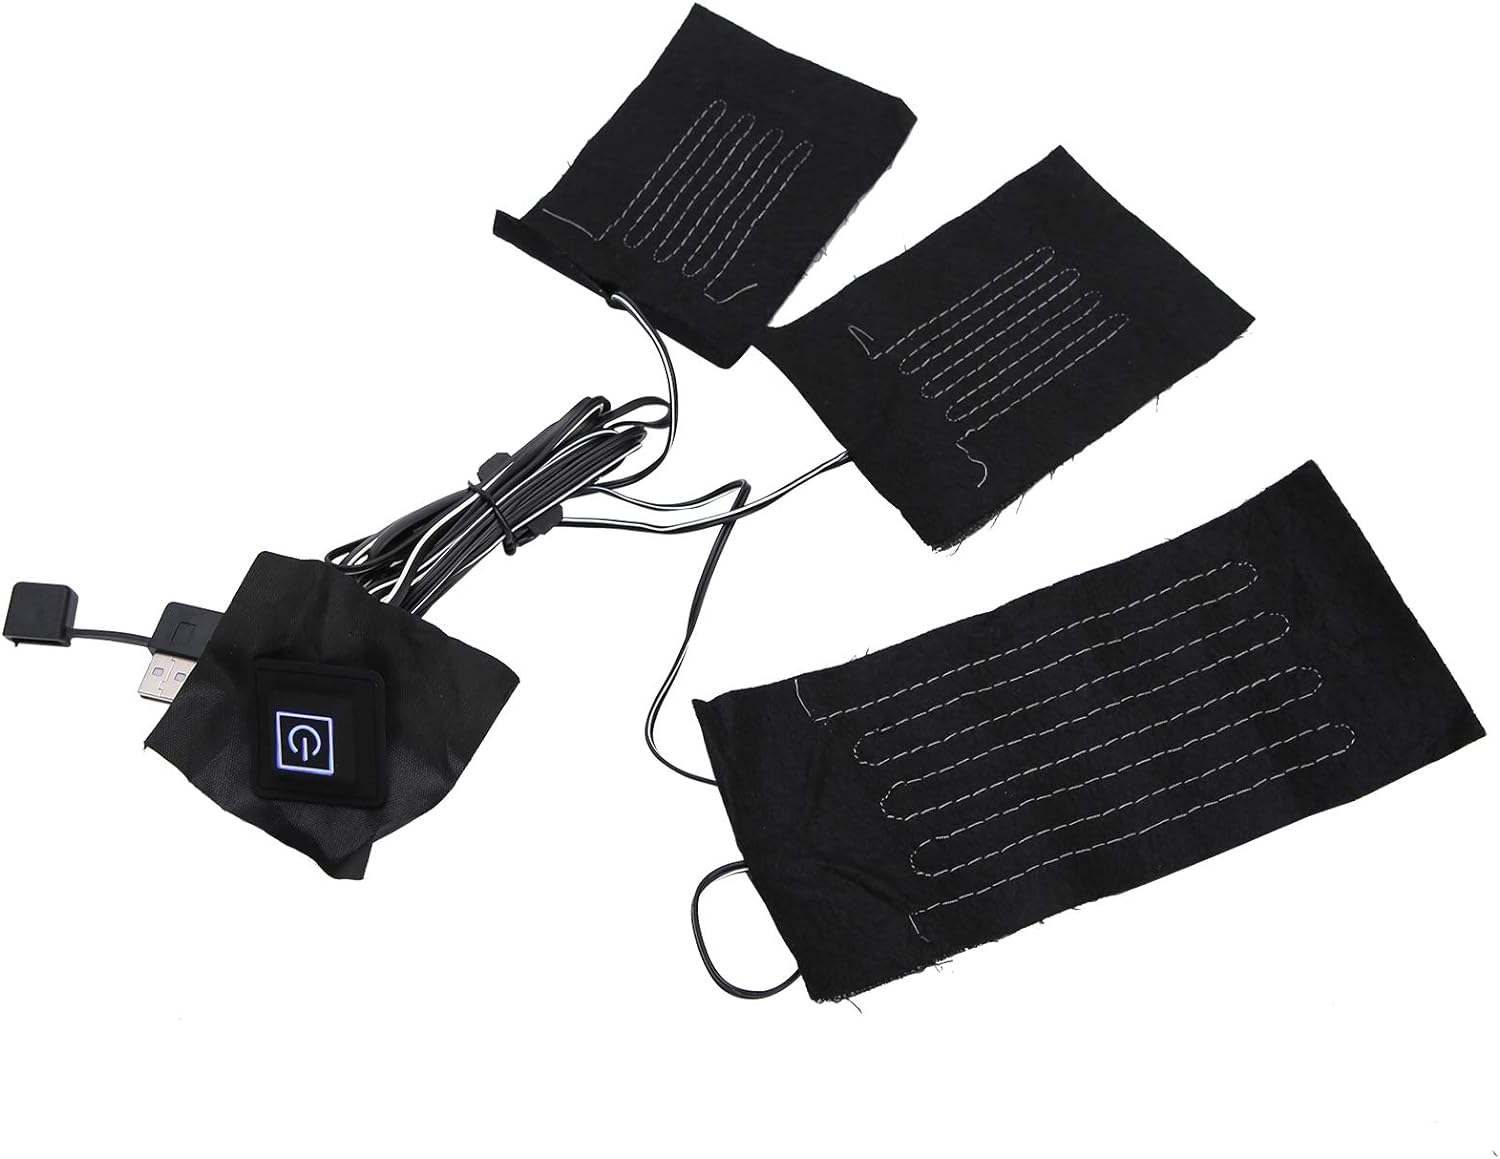 Electric Heating Pads for Jackets,Vests - USB Heating, Waterproof & In